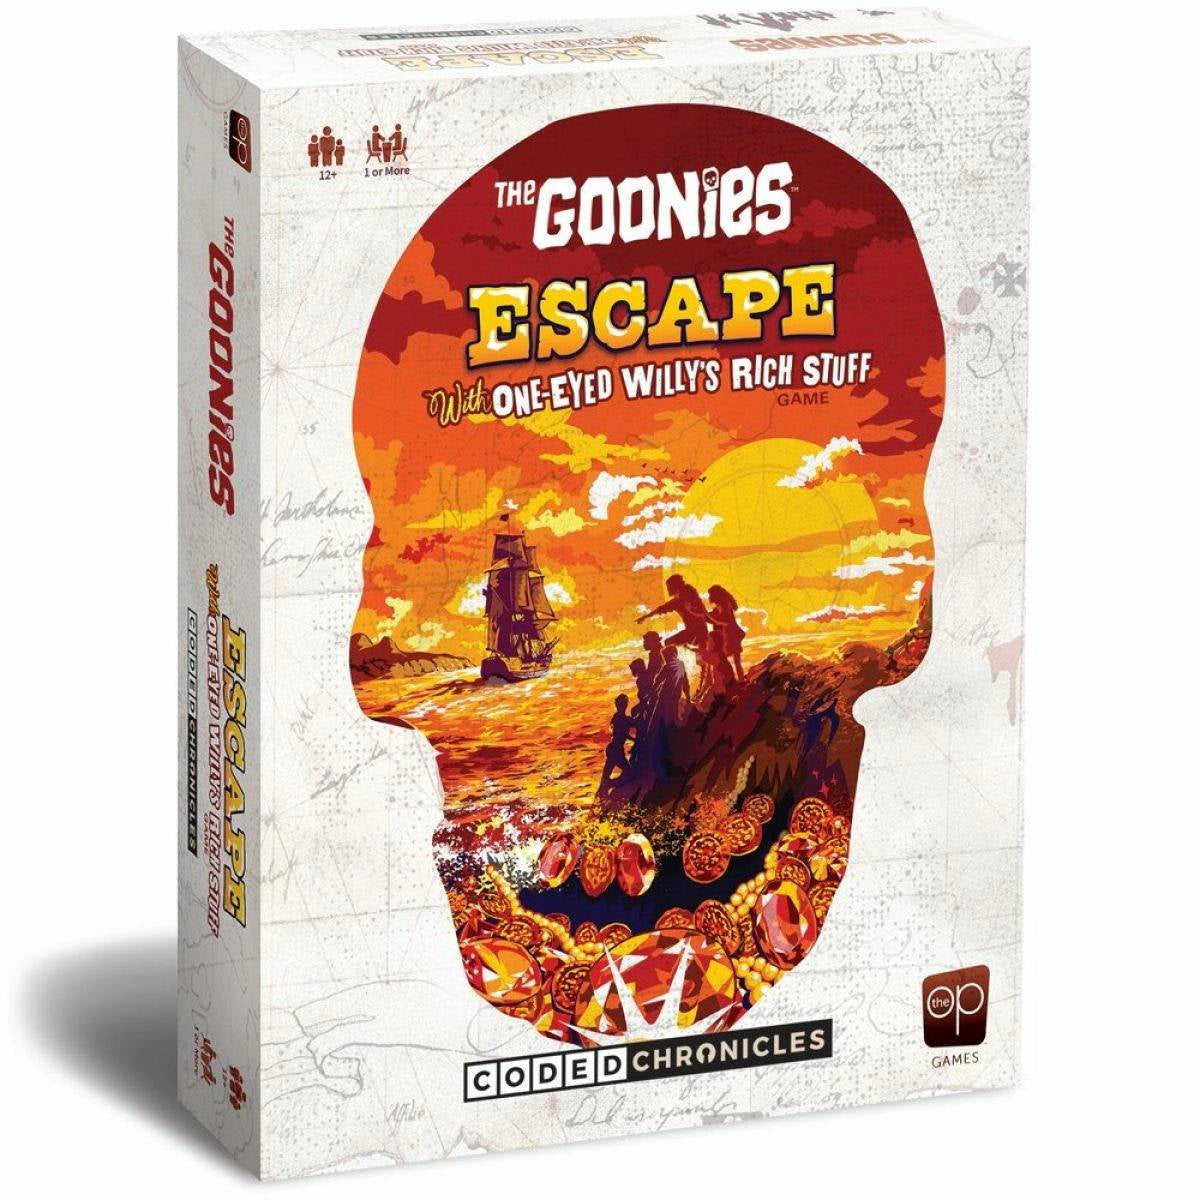 The Goonies: Escape with One-Eyed Willys Rich Stuff - A Coded Chronicles Game